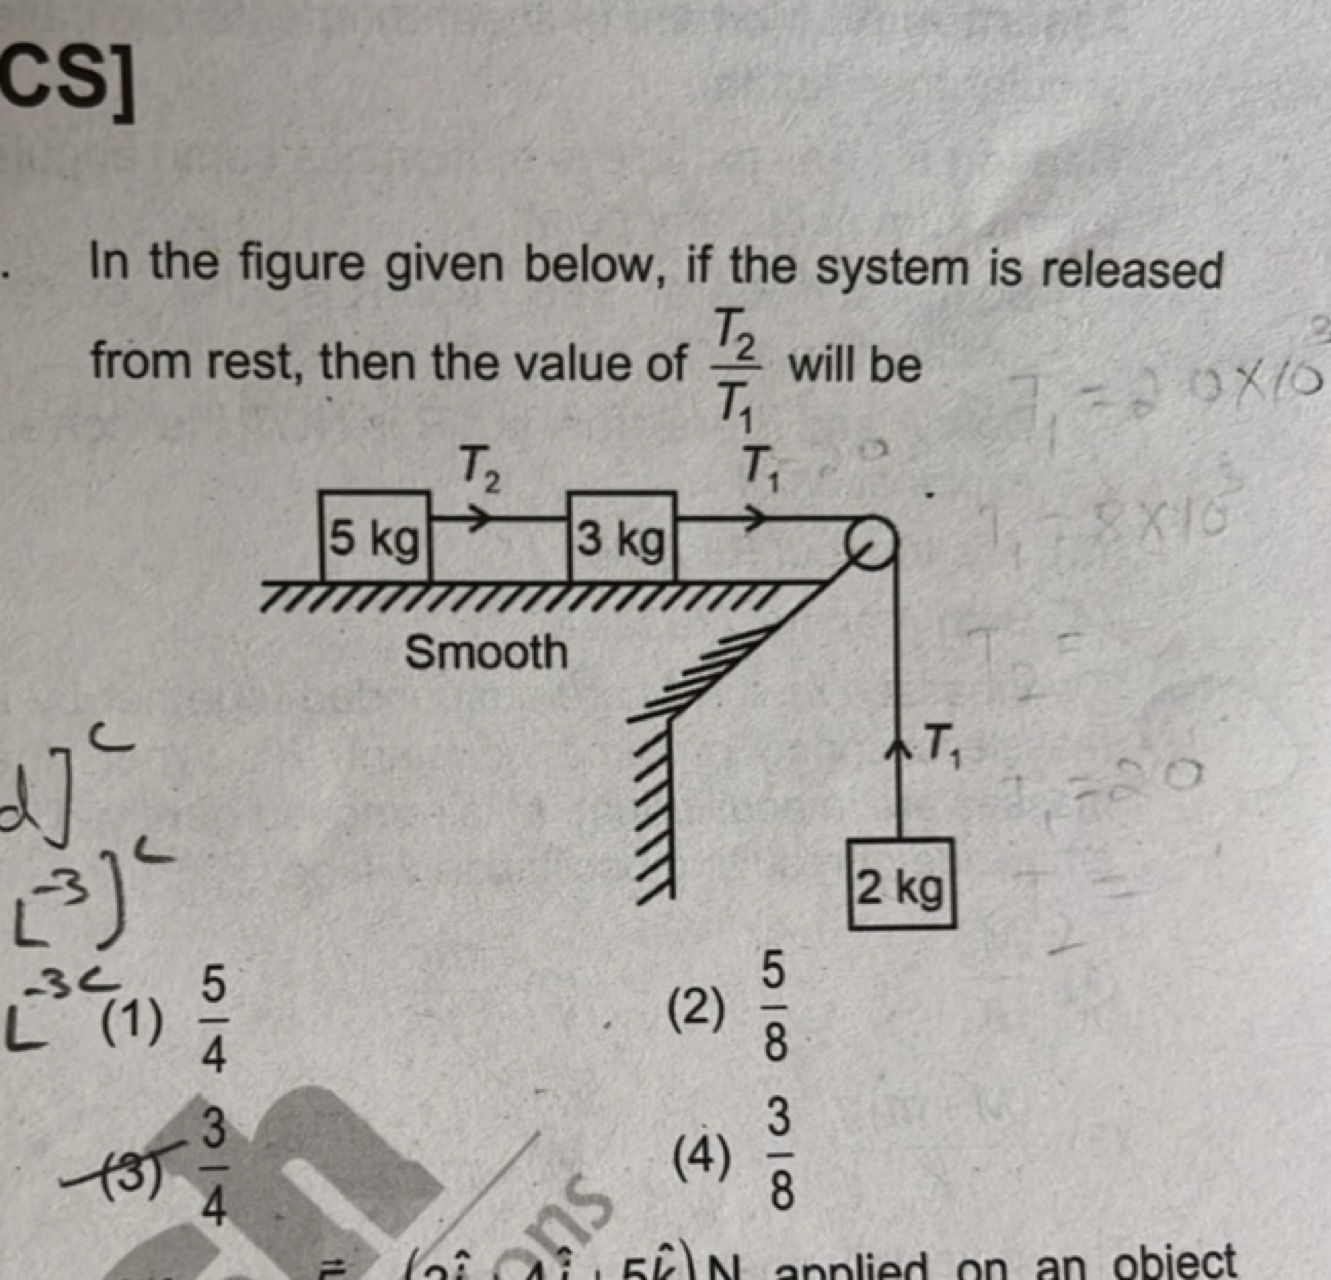 CS]
In the figure given below, if the system is released from rest, th